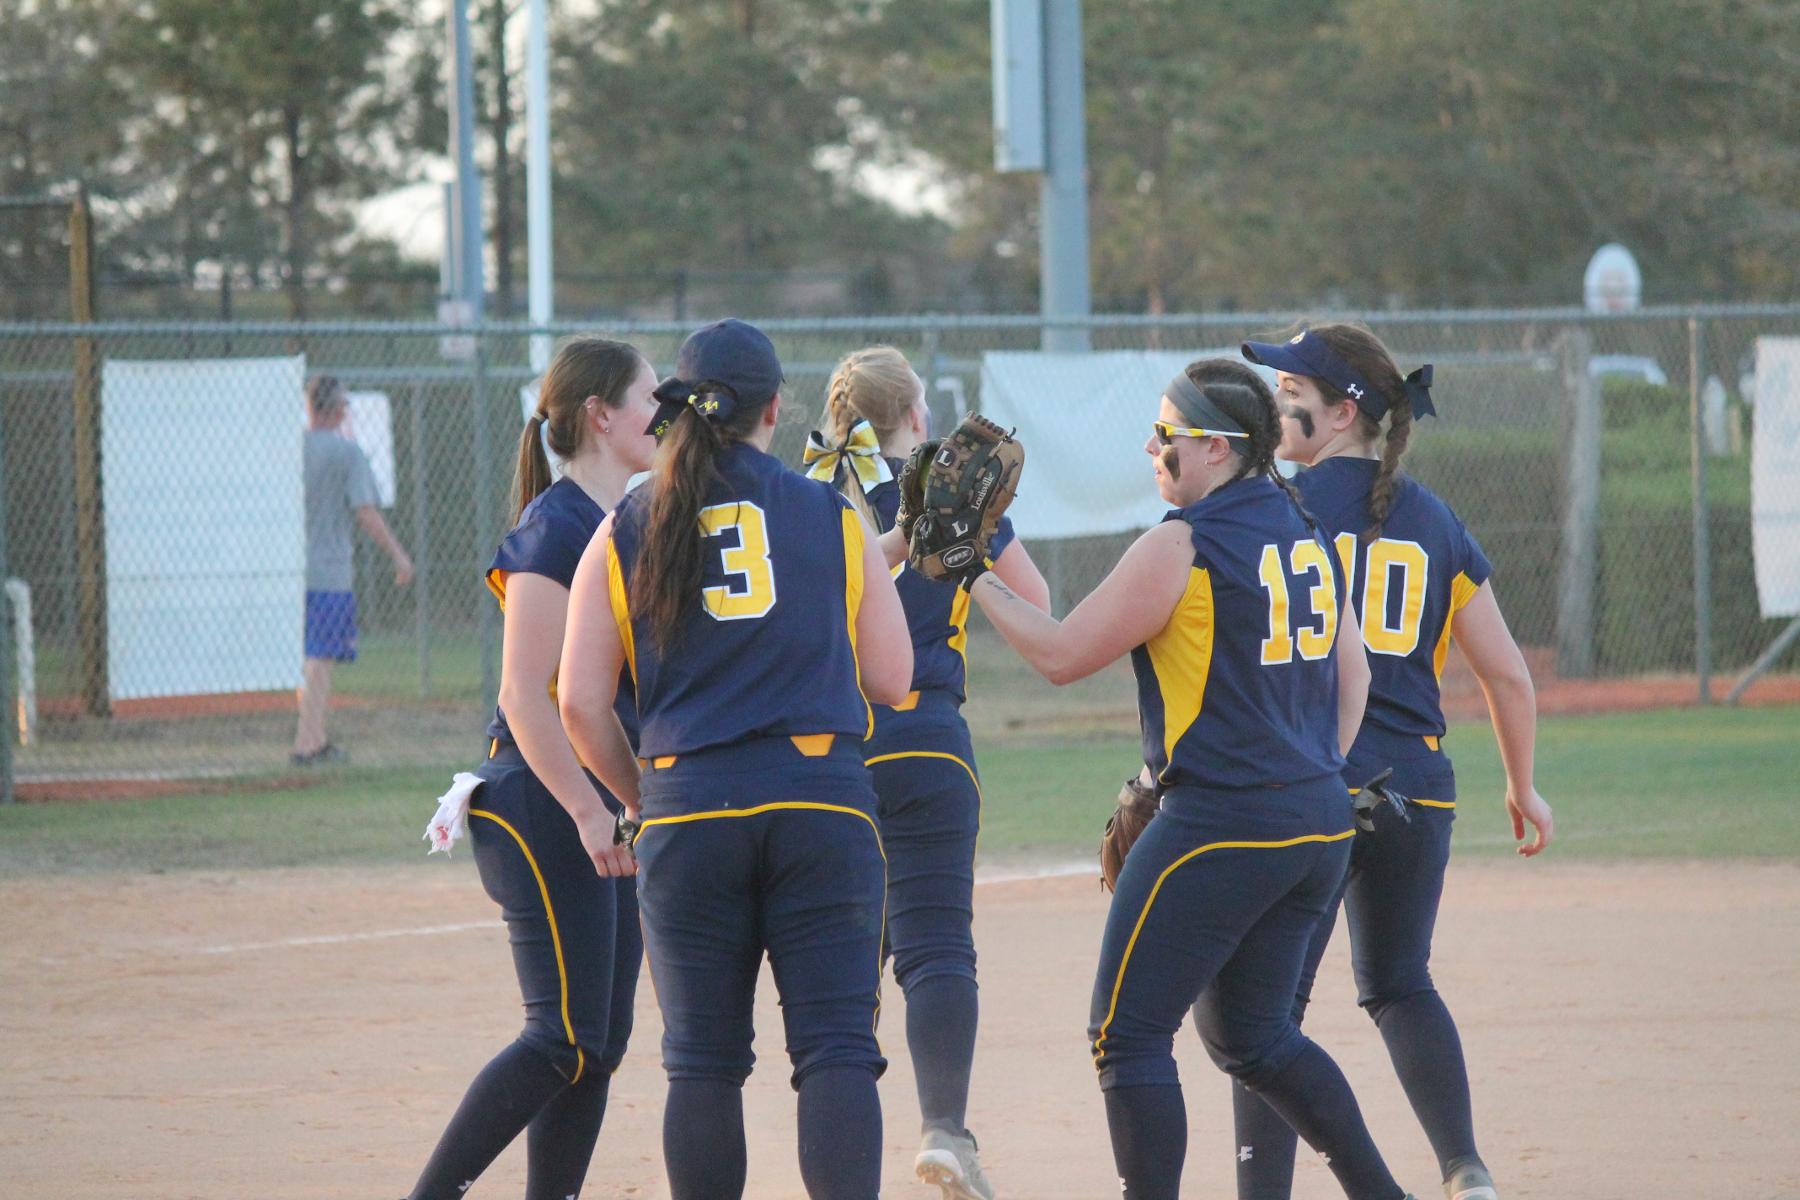 Softball falls to Westfield 5-3 in MASCAC tournament